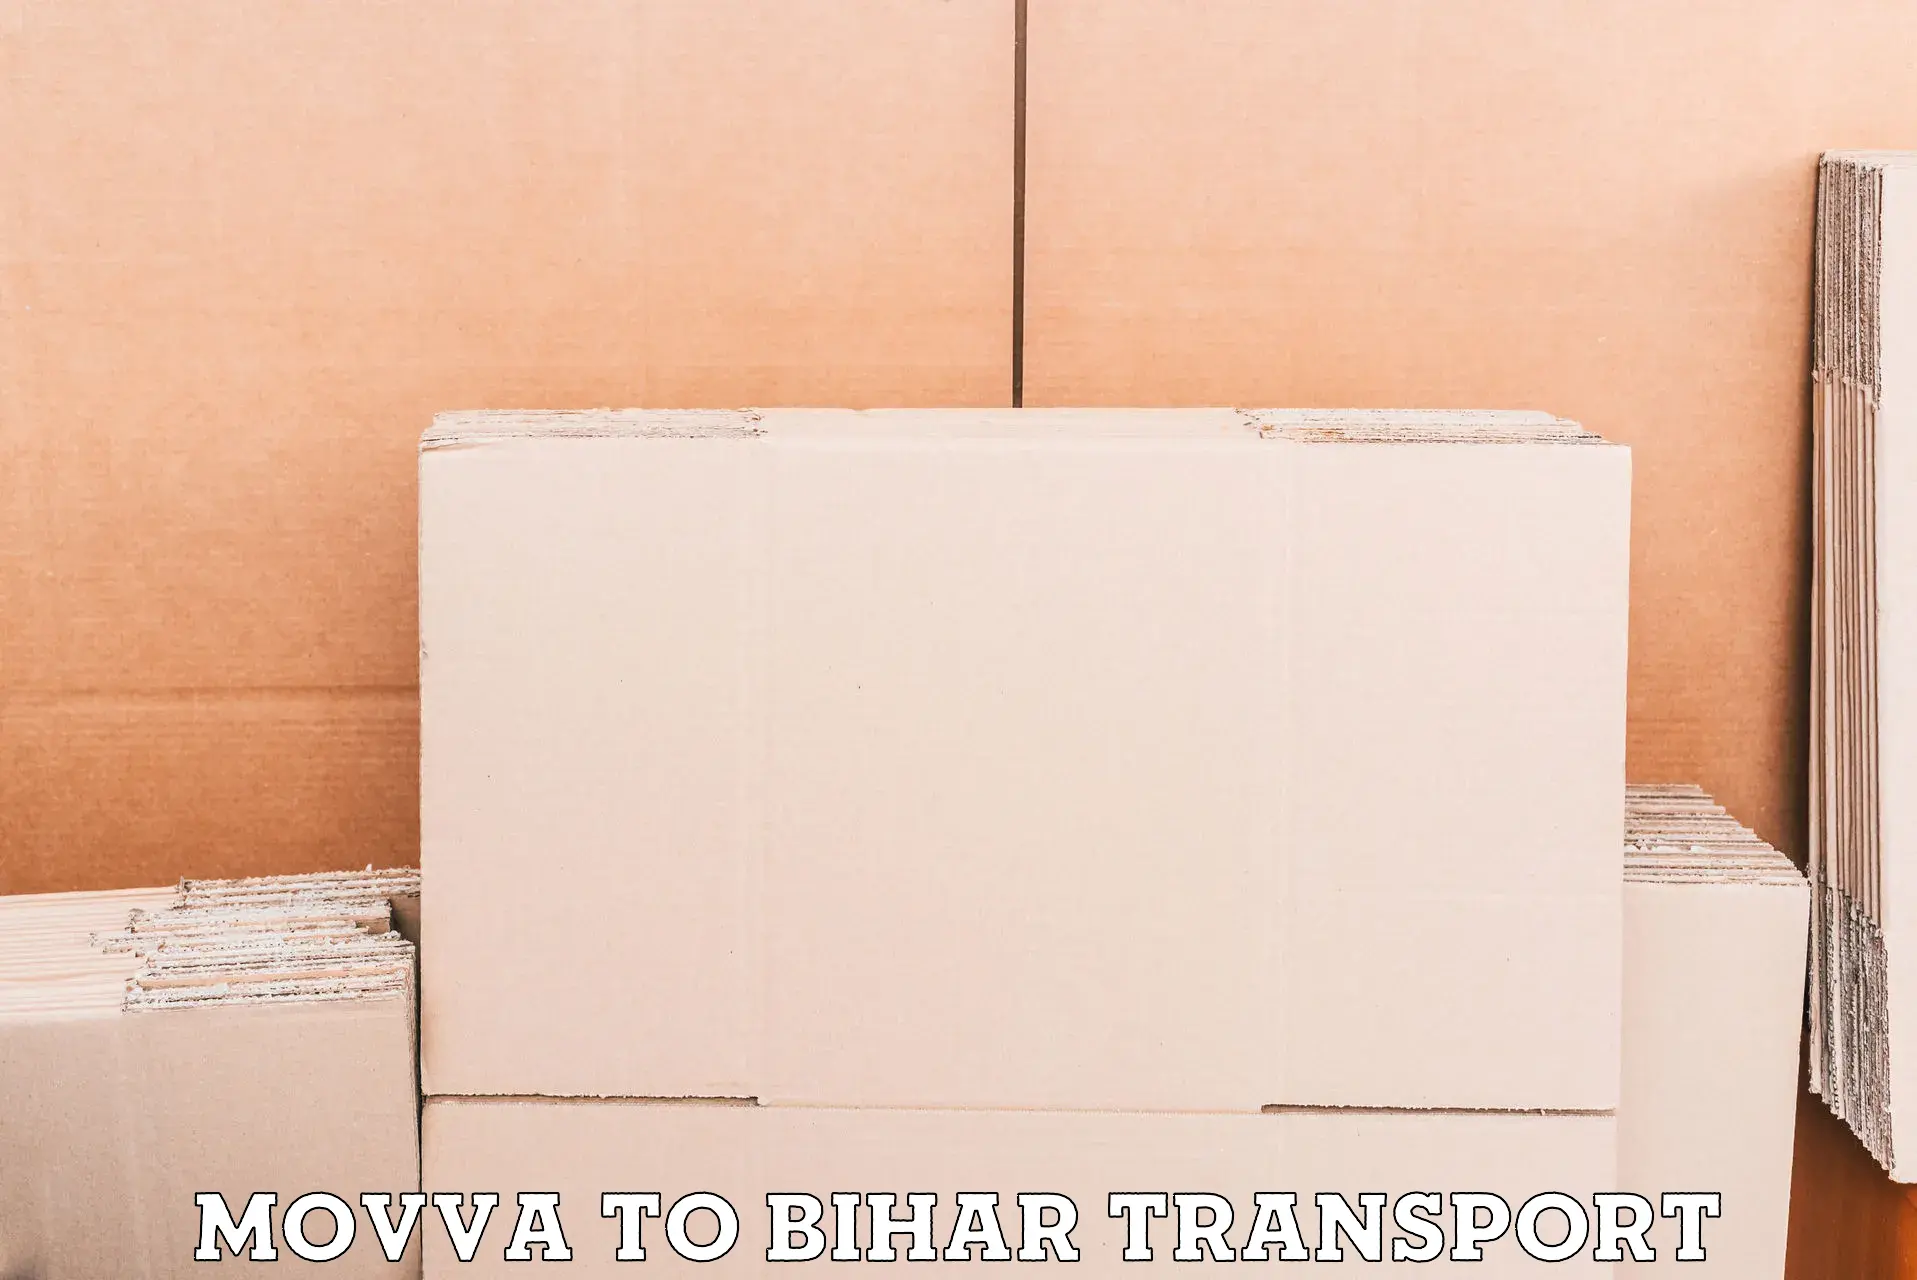 Air freight transport services Movva to Sursand